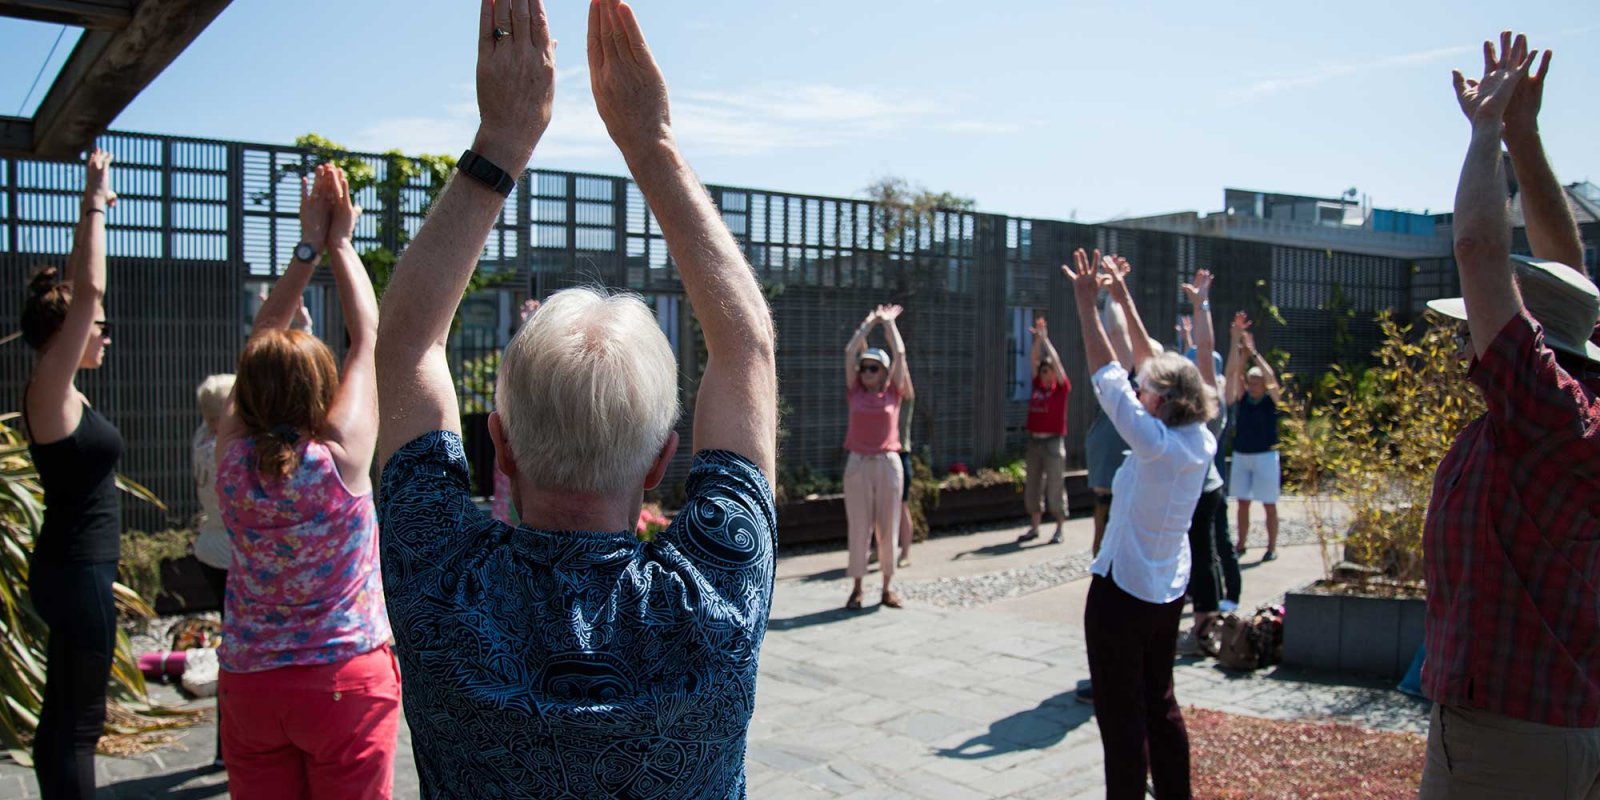 Qigong at the Rooftop Garden